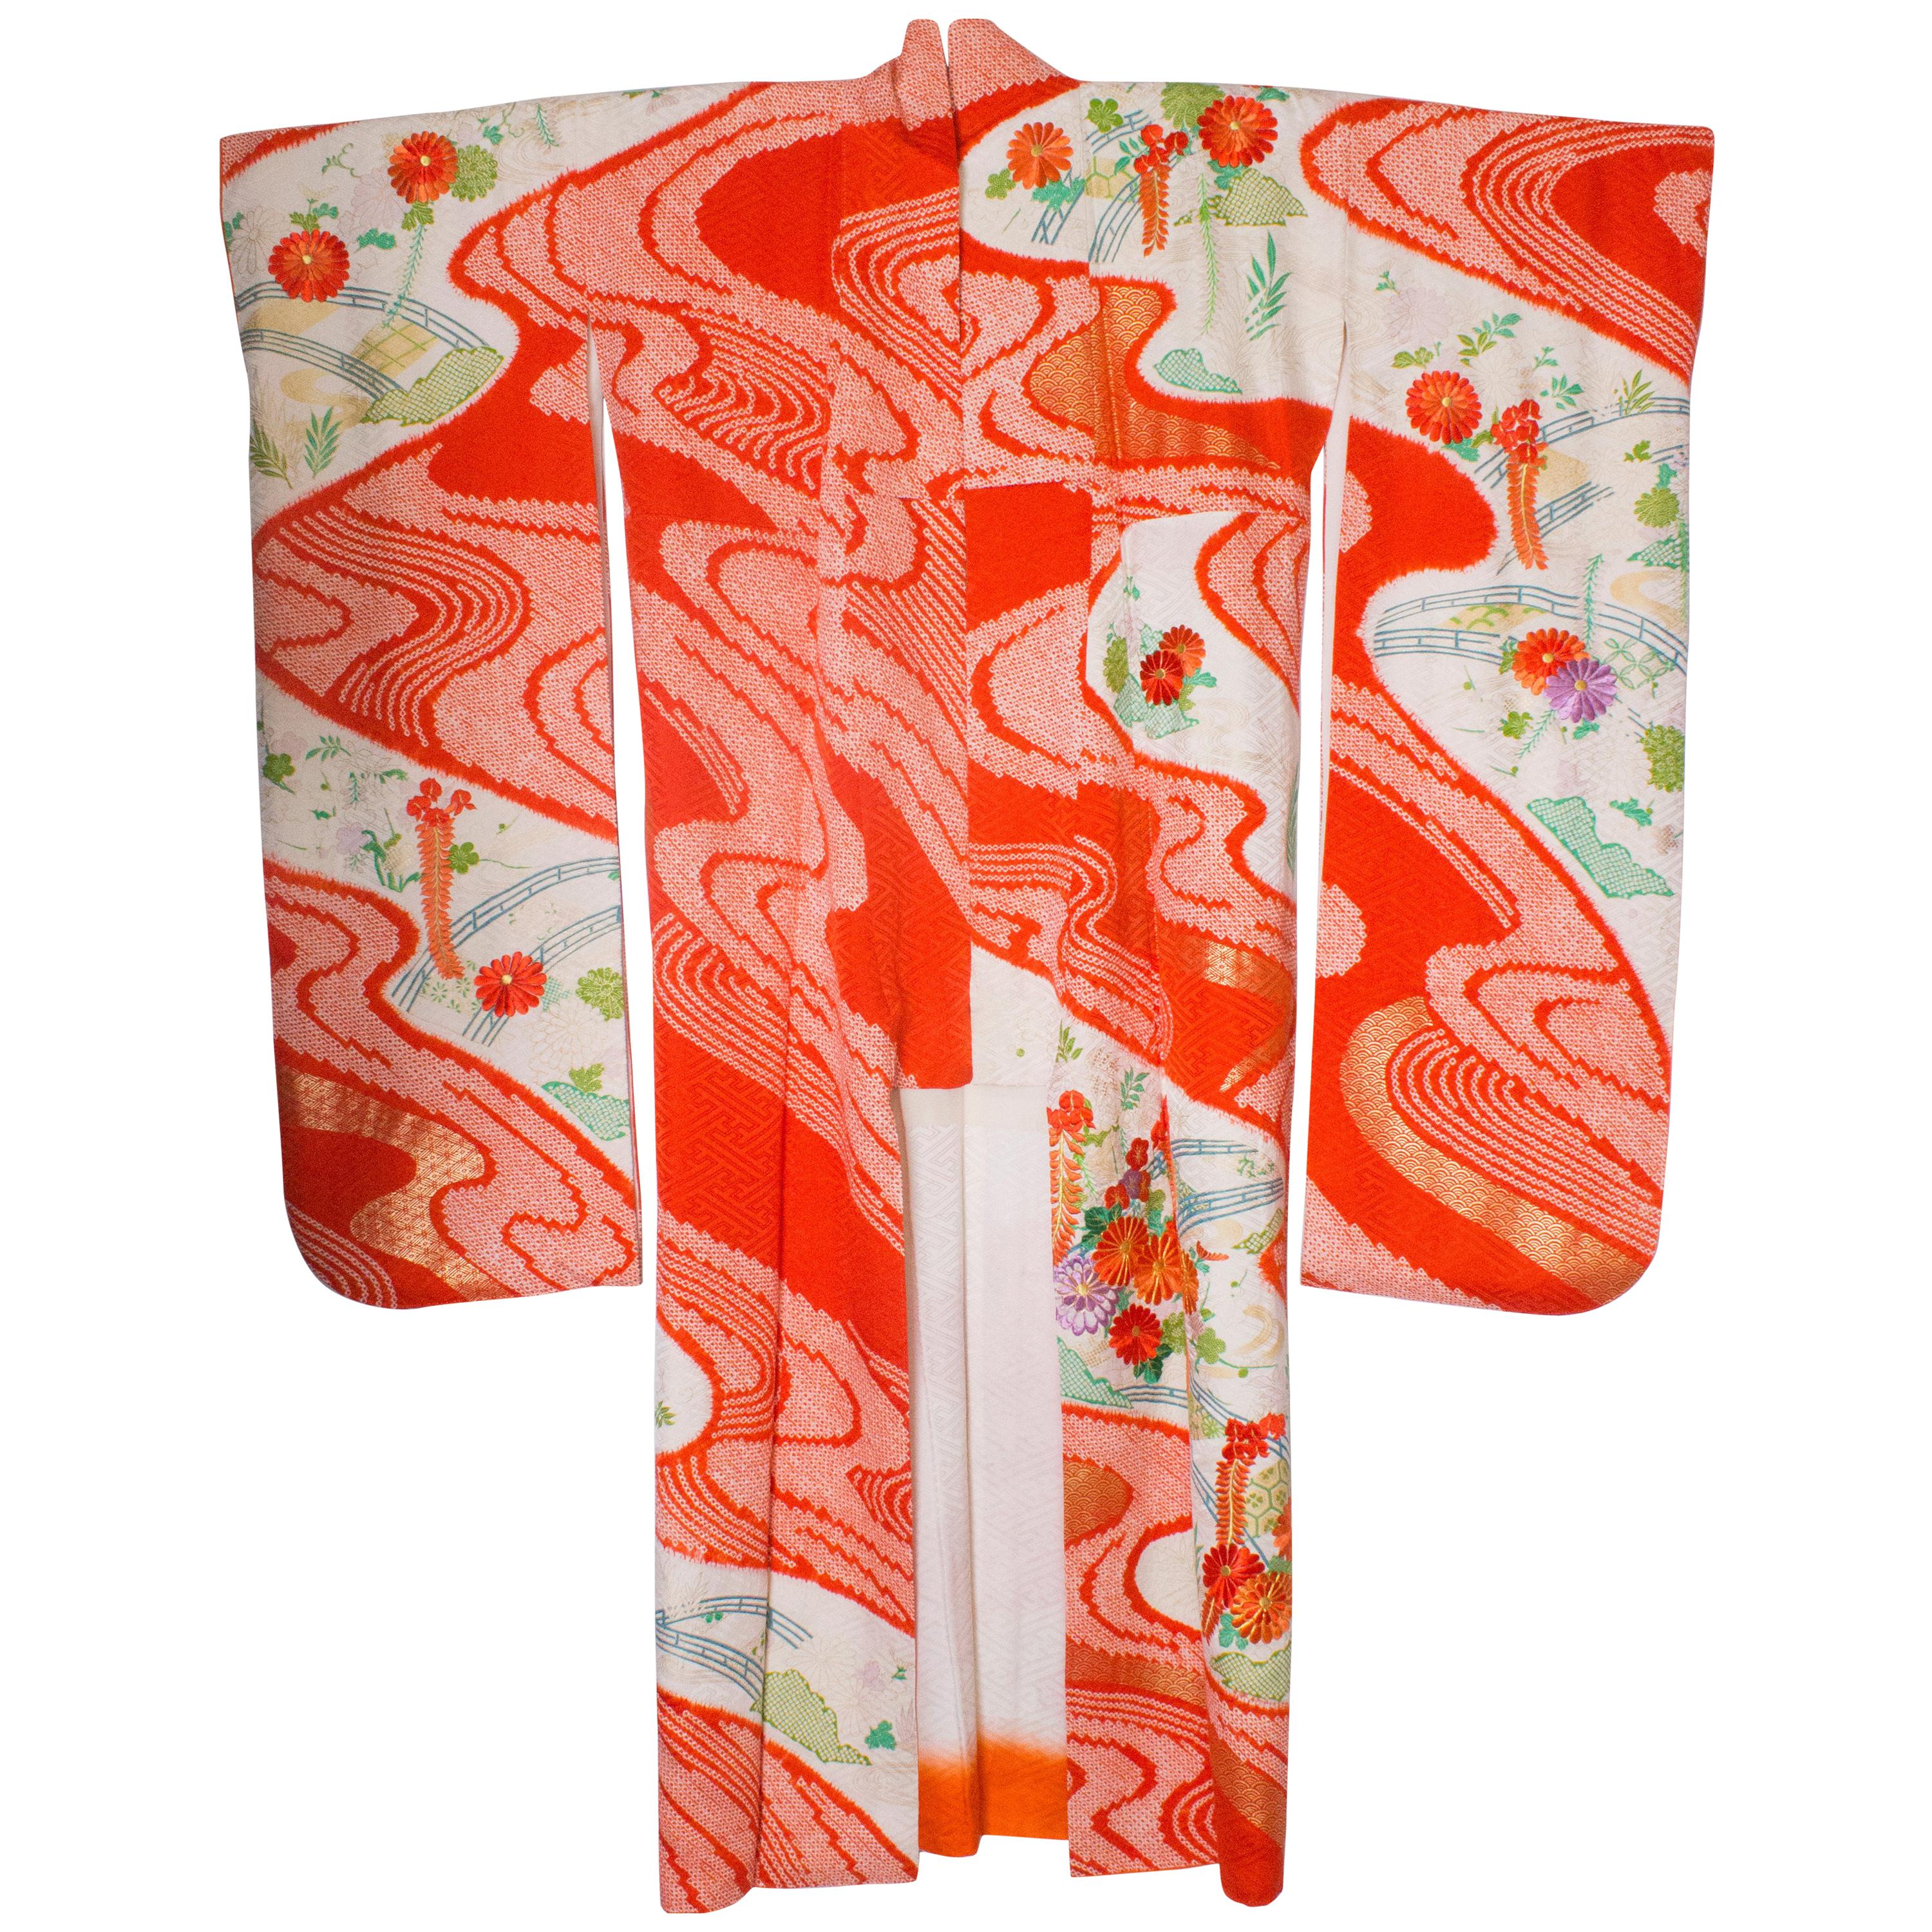 Kimono with elaborate floral embroidery